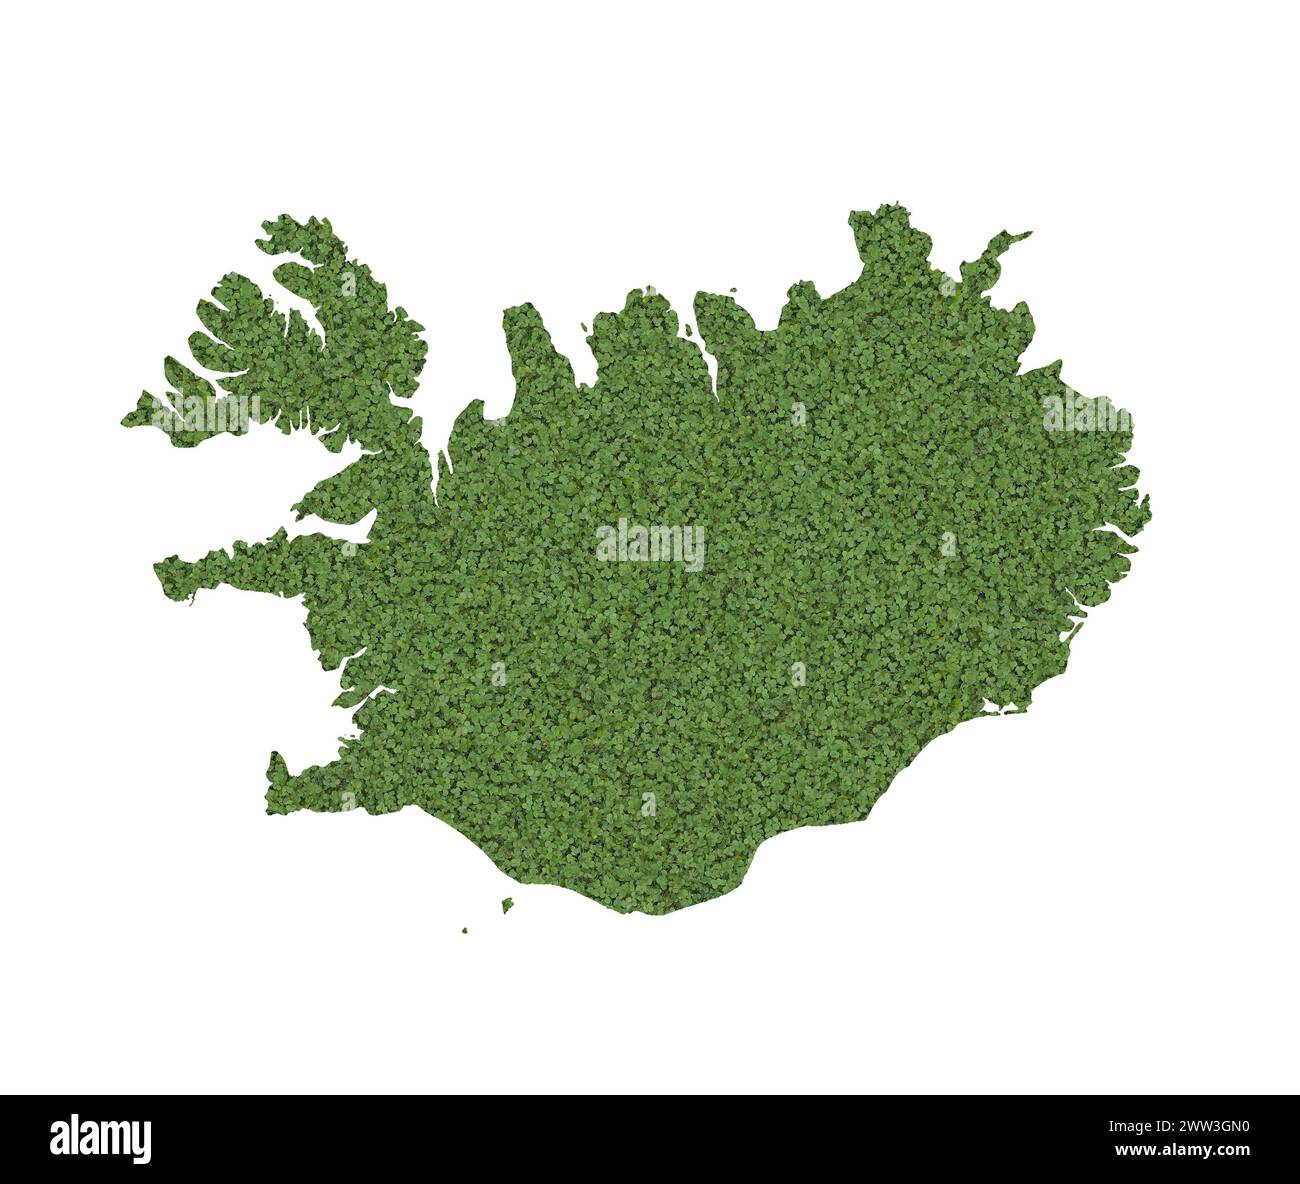 Outline of the map of Iceland as a green island Stock Photo